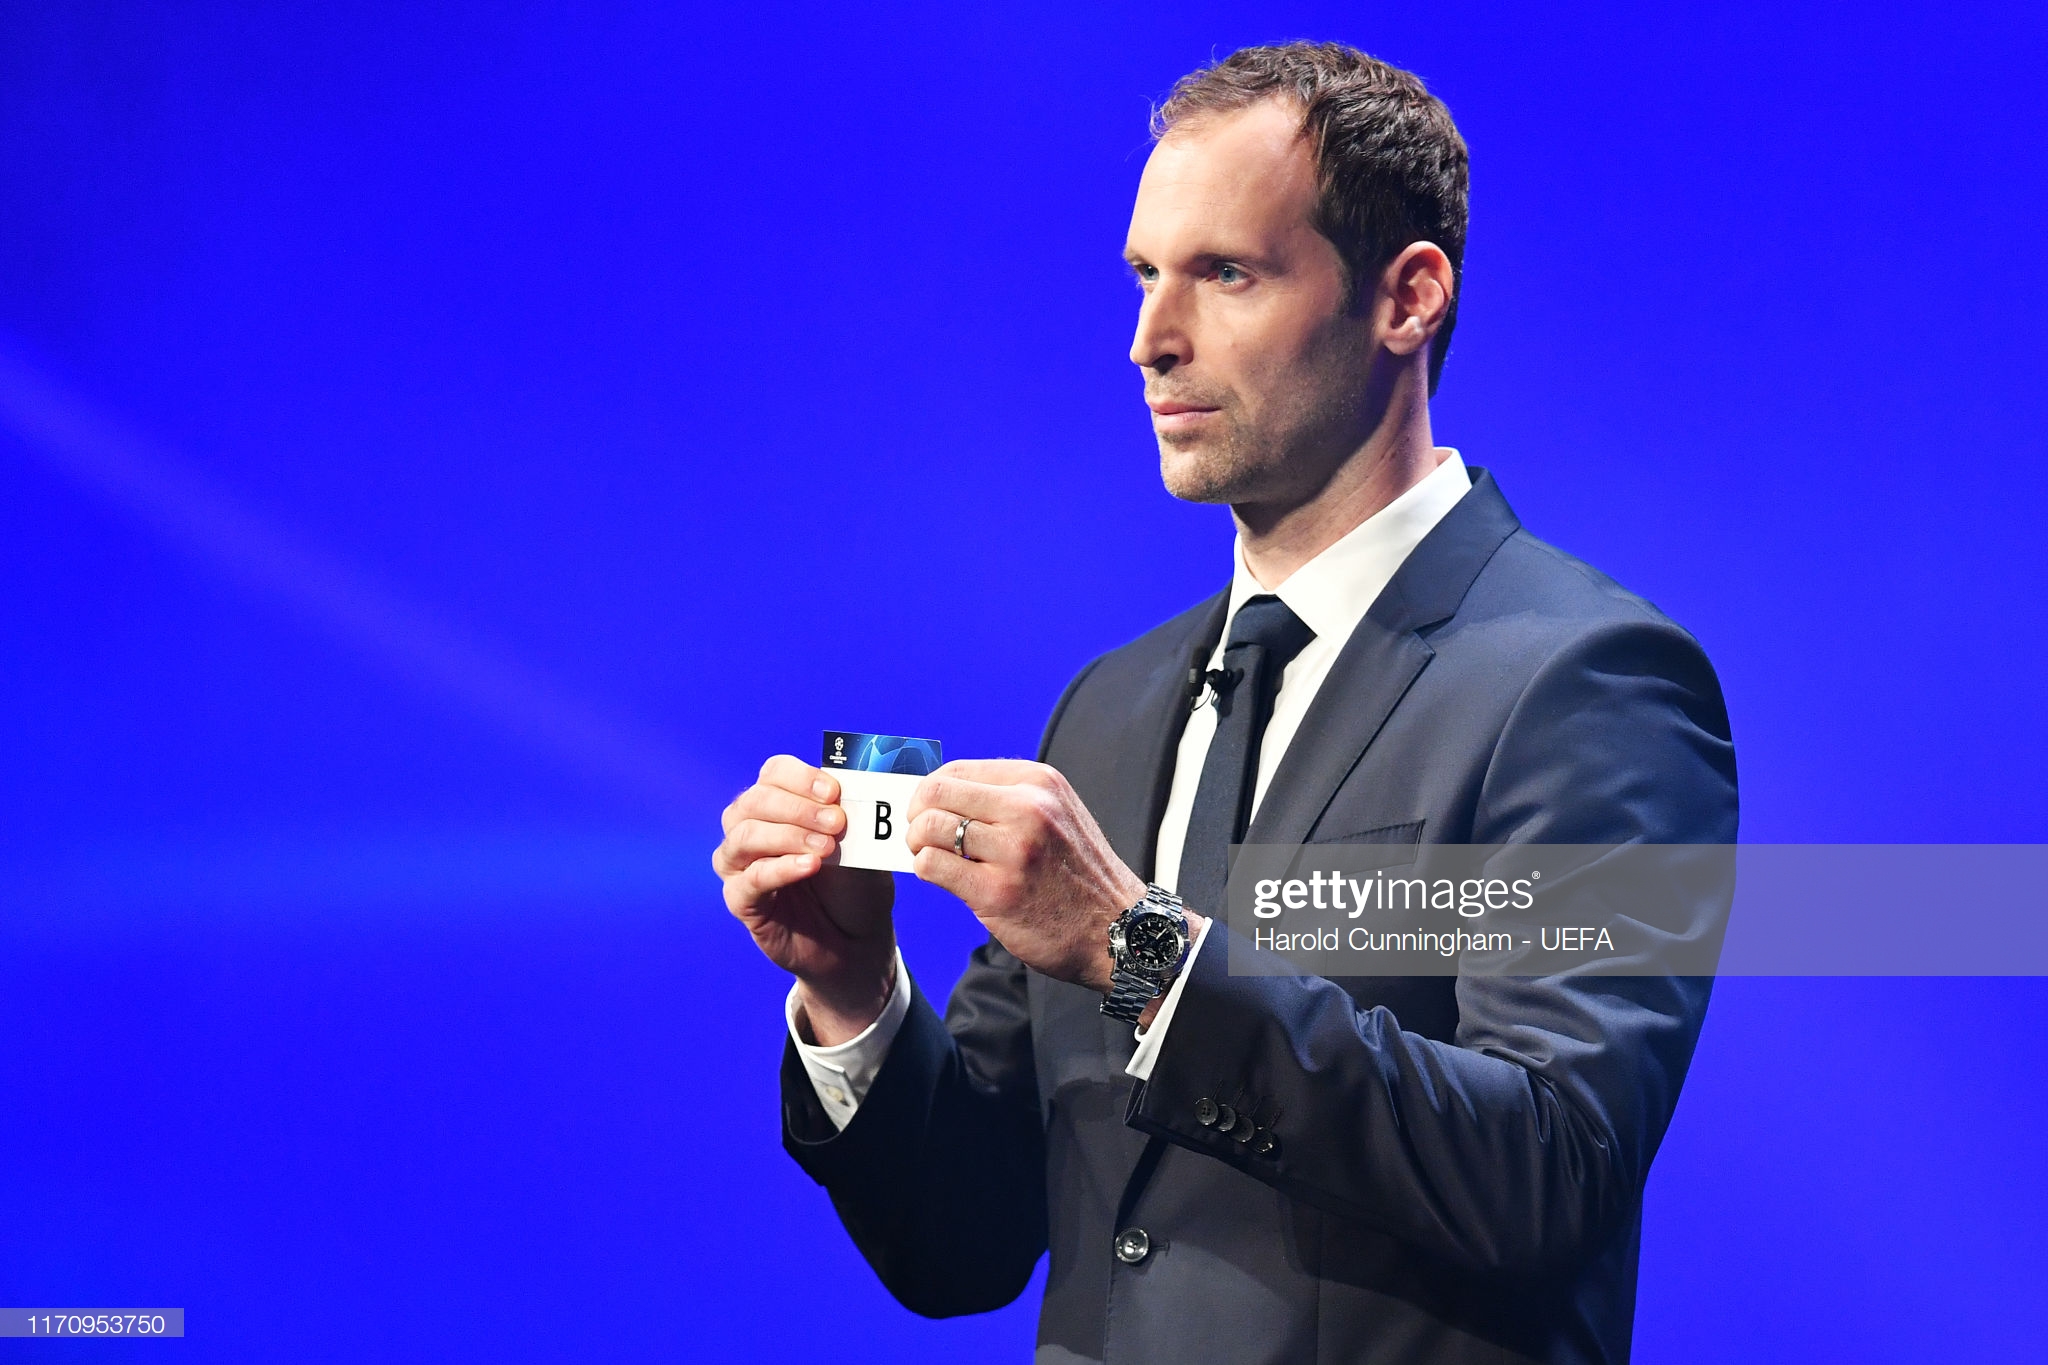 gettyimages-1170953750-2048x2048.jpg